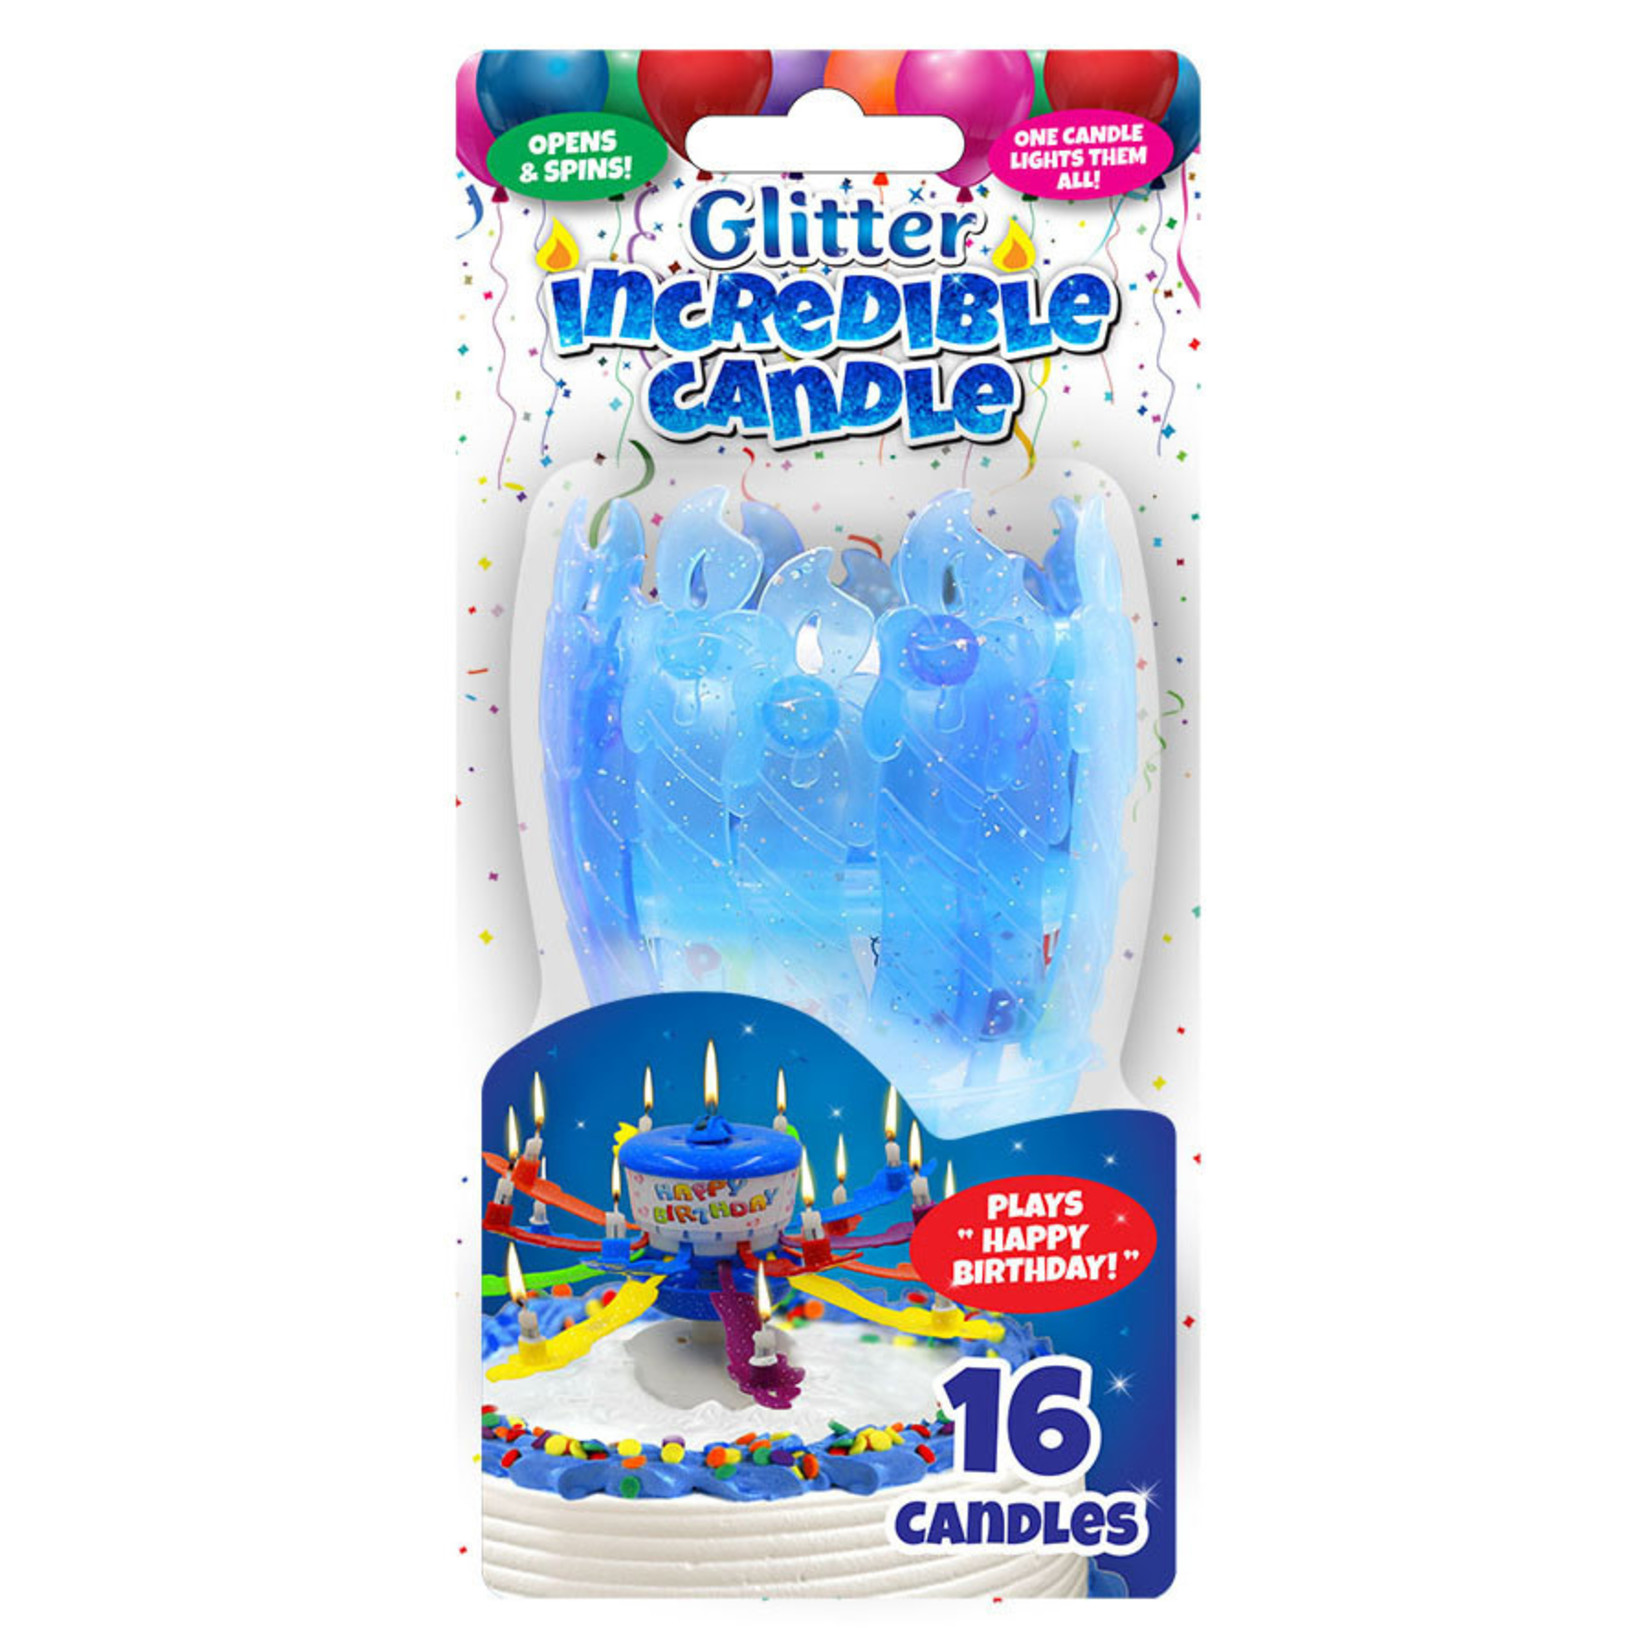 Just For Laughs Glitter Incredible Candles that Spin!